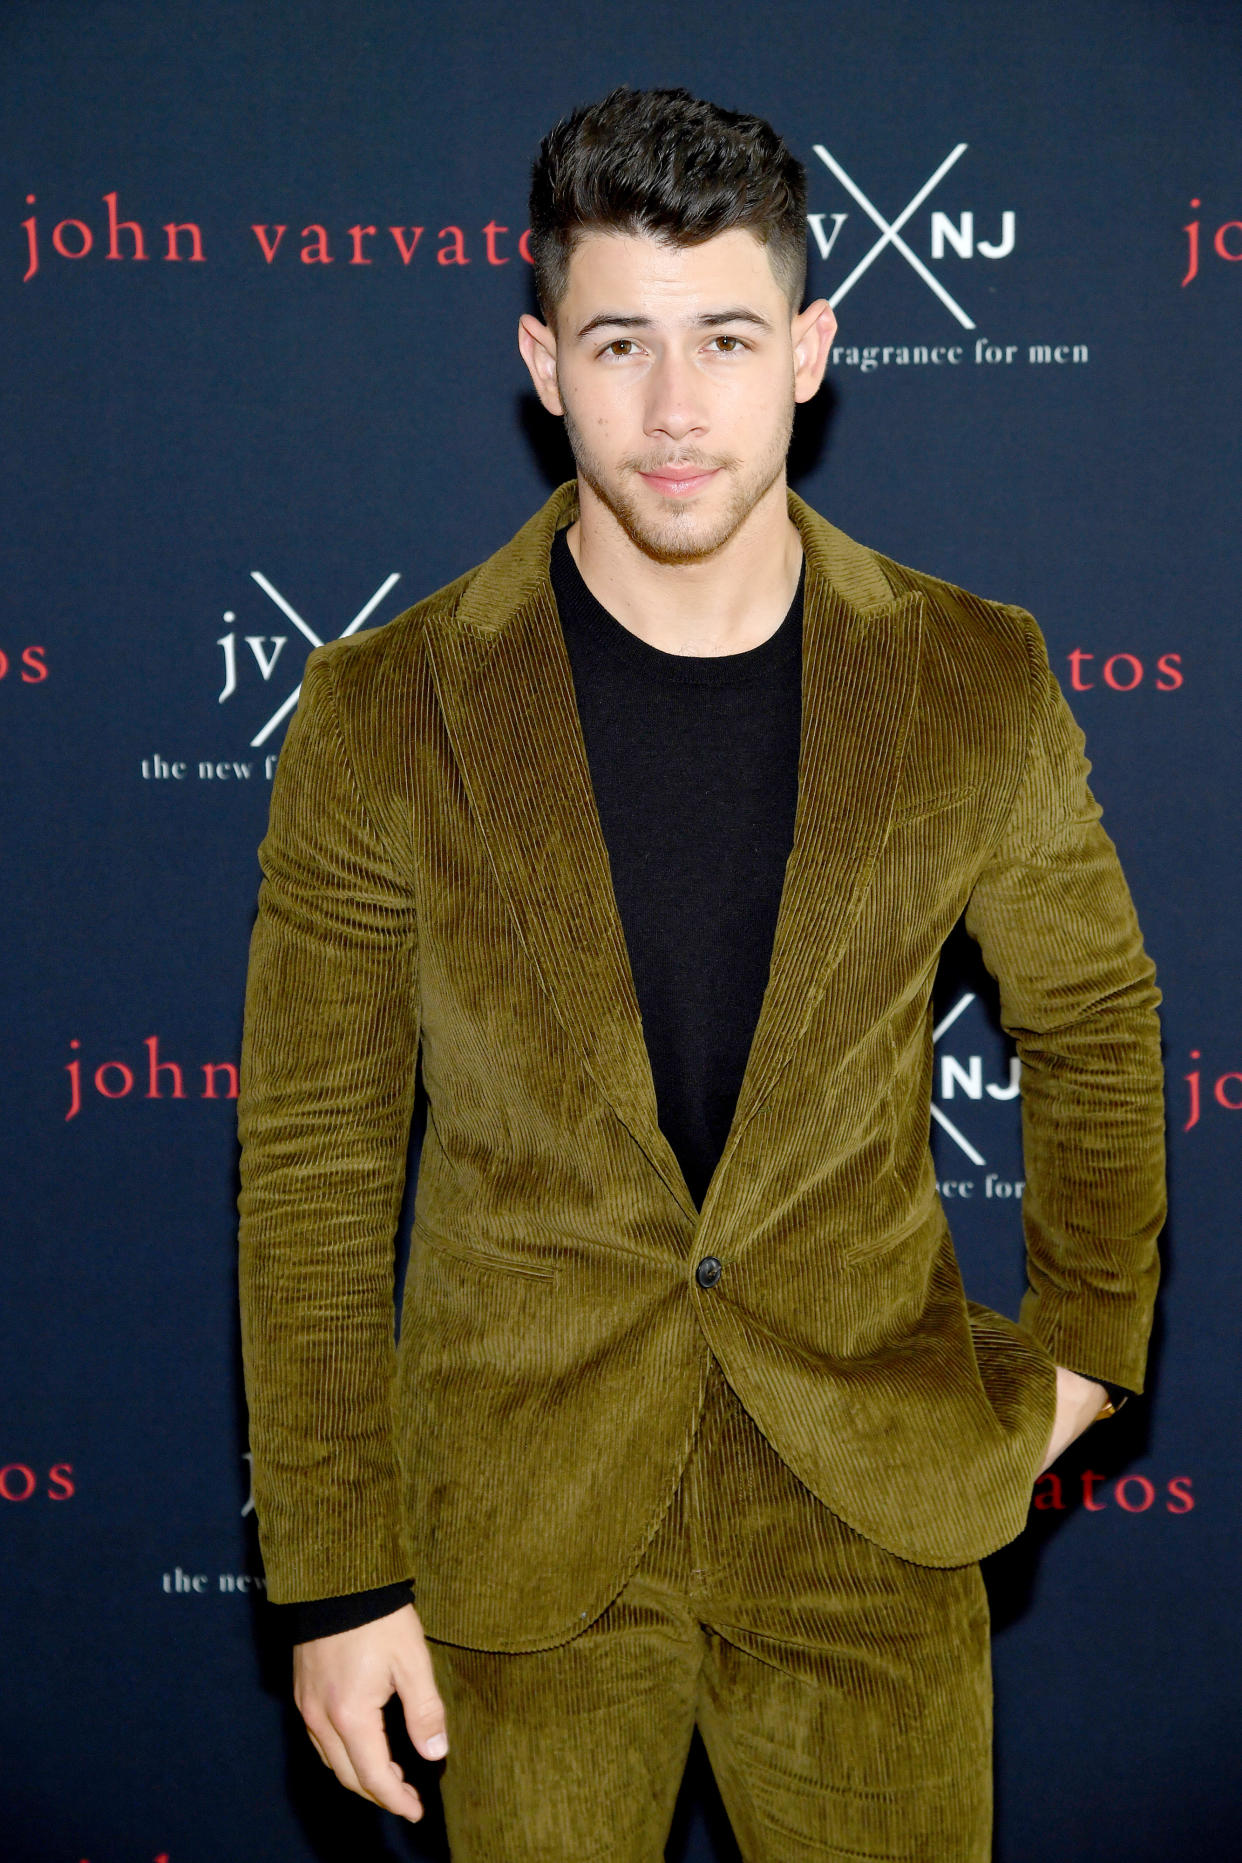 Nick Jonas has had the busiest year of his life, and he's not ready to slow down. (Photo: Getty Images)